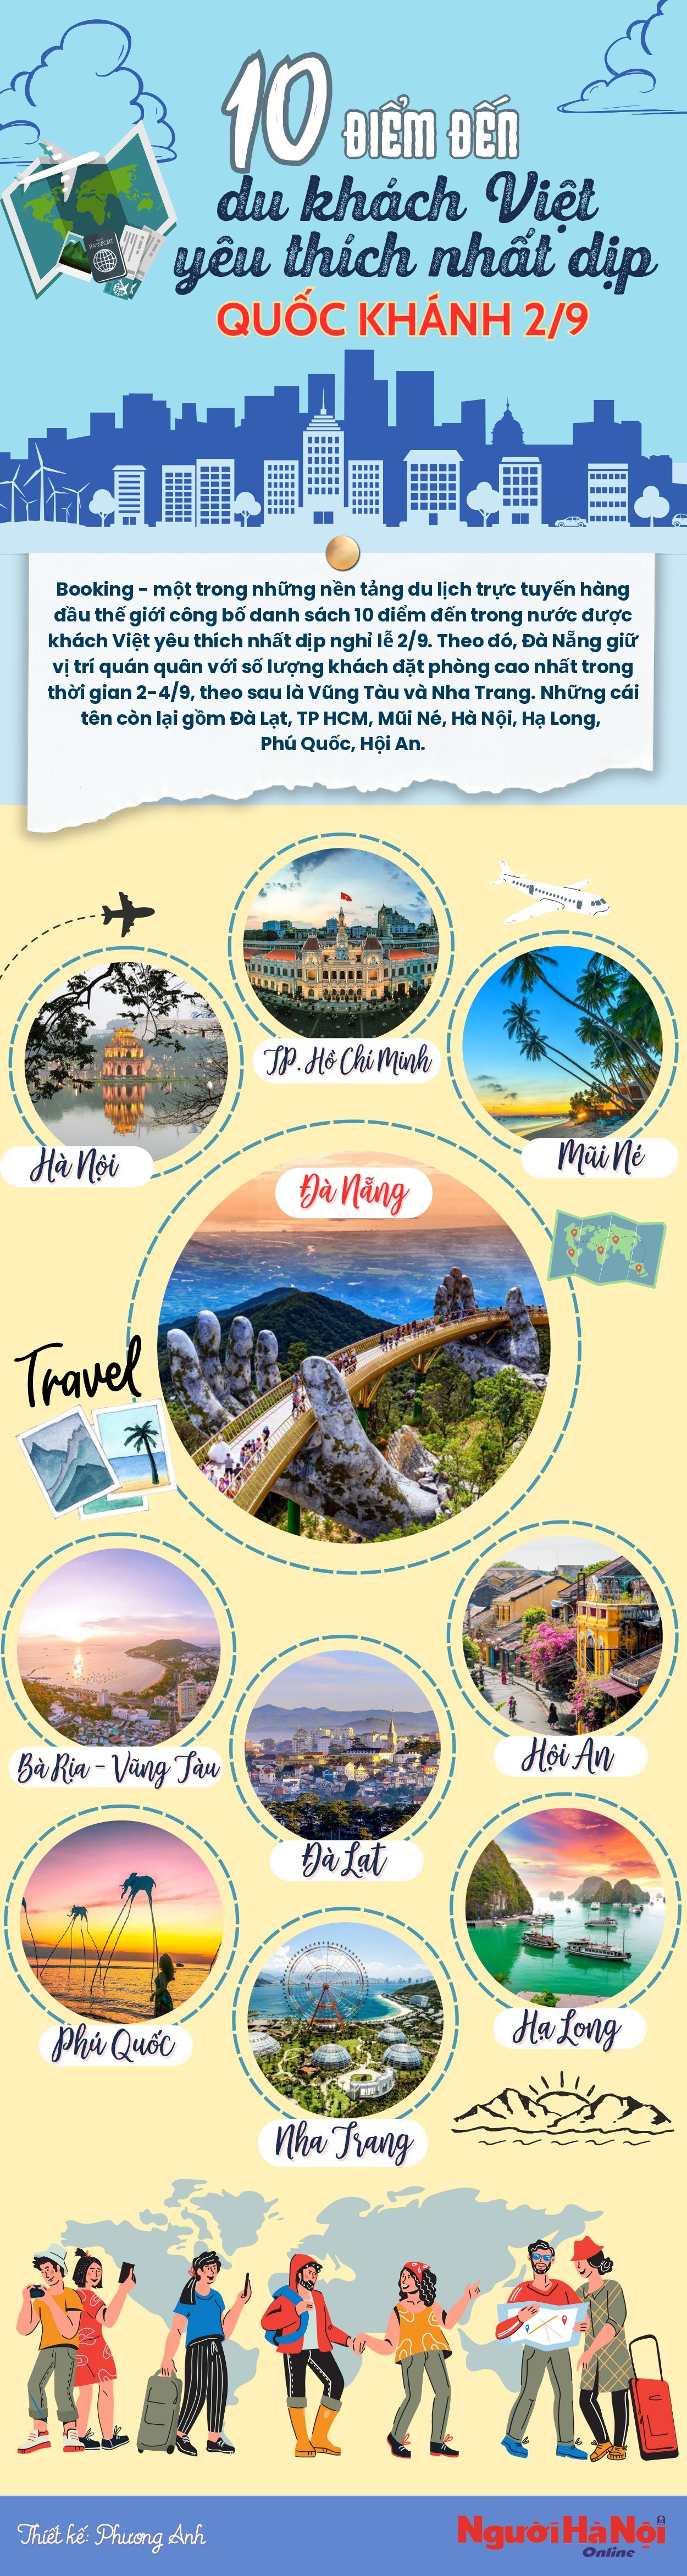 navy-modern-travel-infographic-800-2600-px-800-3000-px-1-_page-0001.jpg